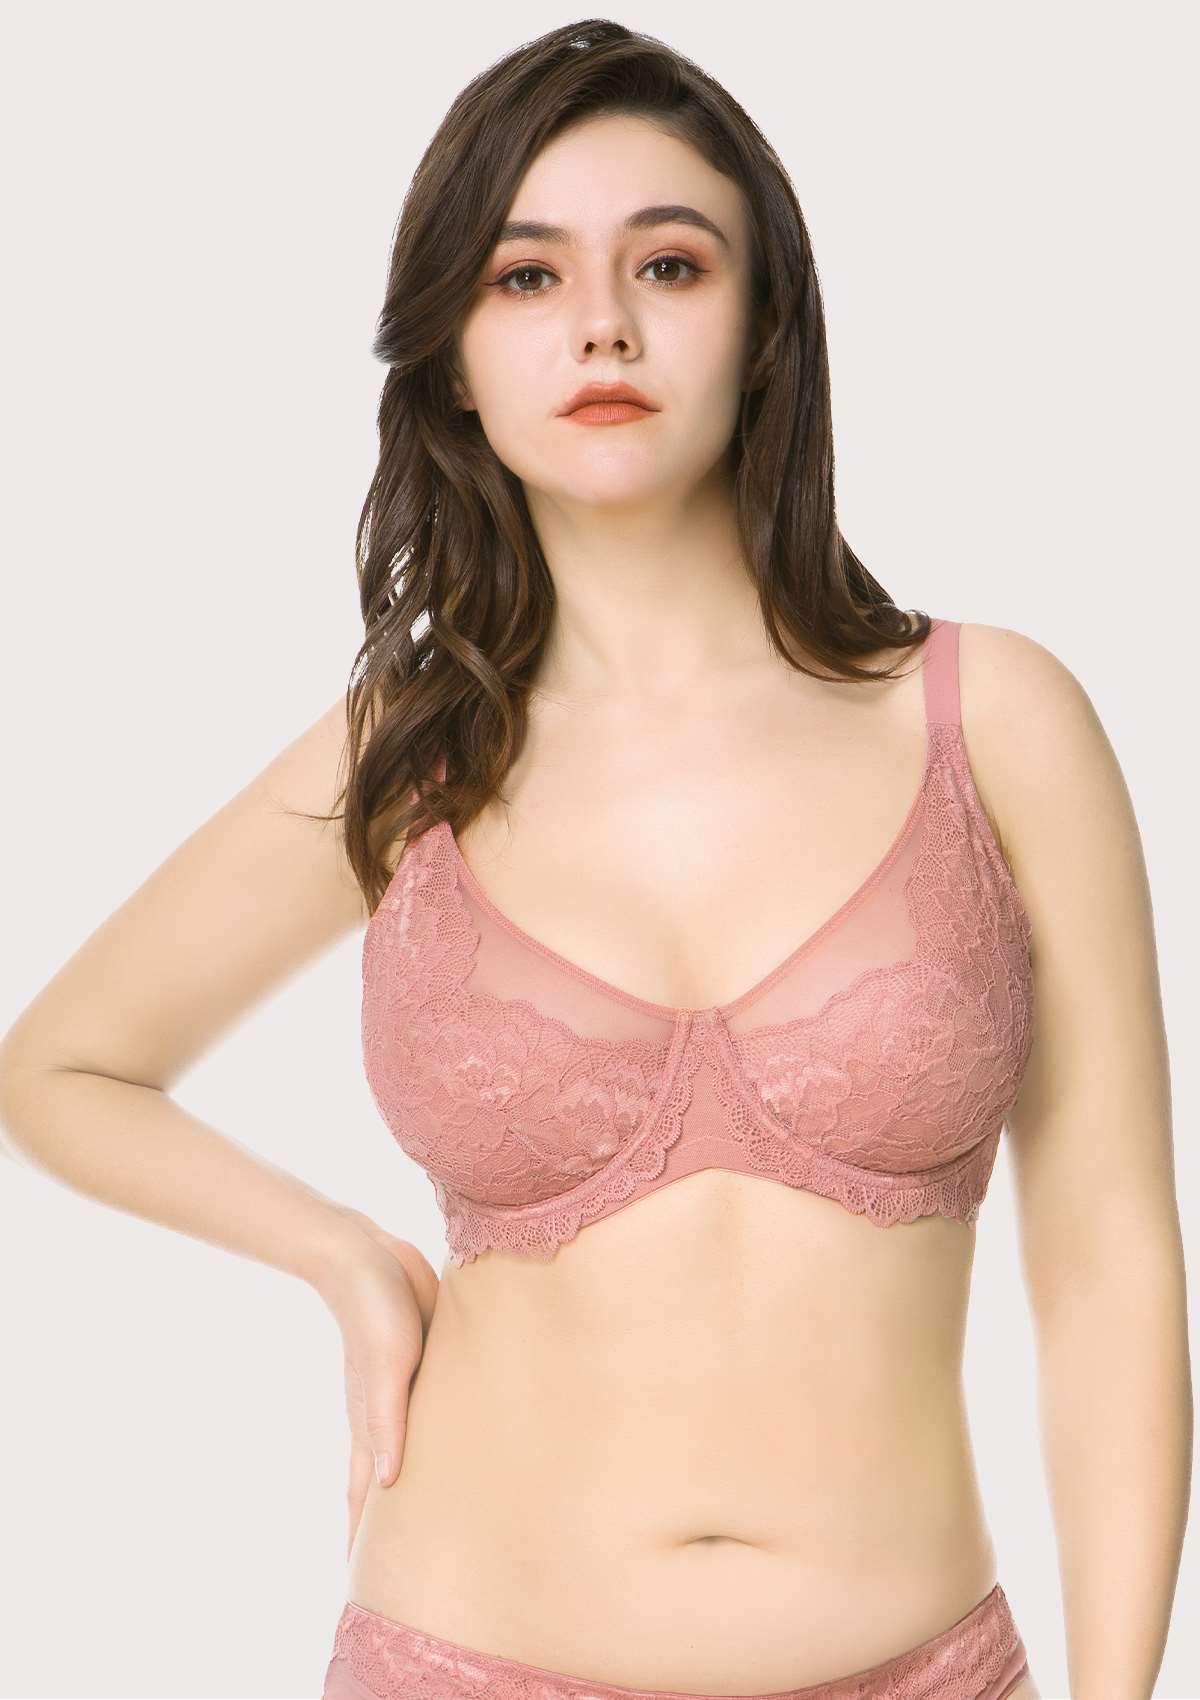 HSIA Peony Lace Unlined Supportive Underwire Bra - Green / 38 / D